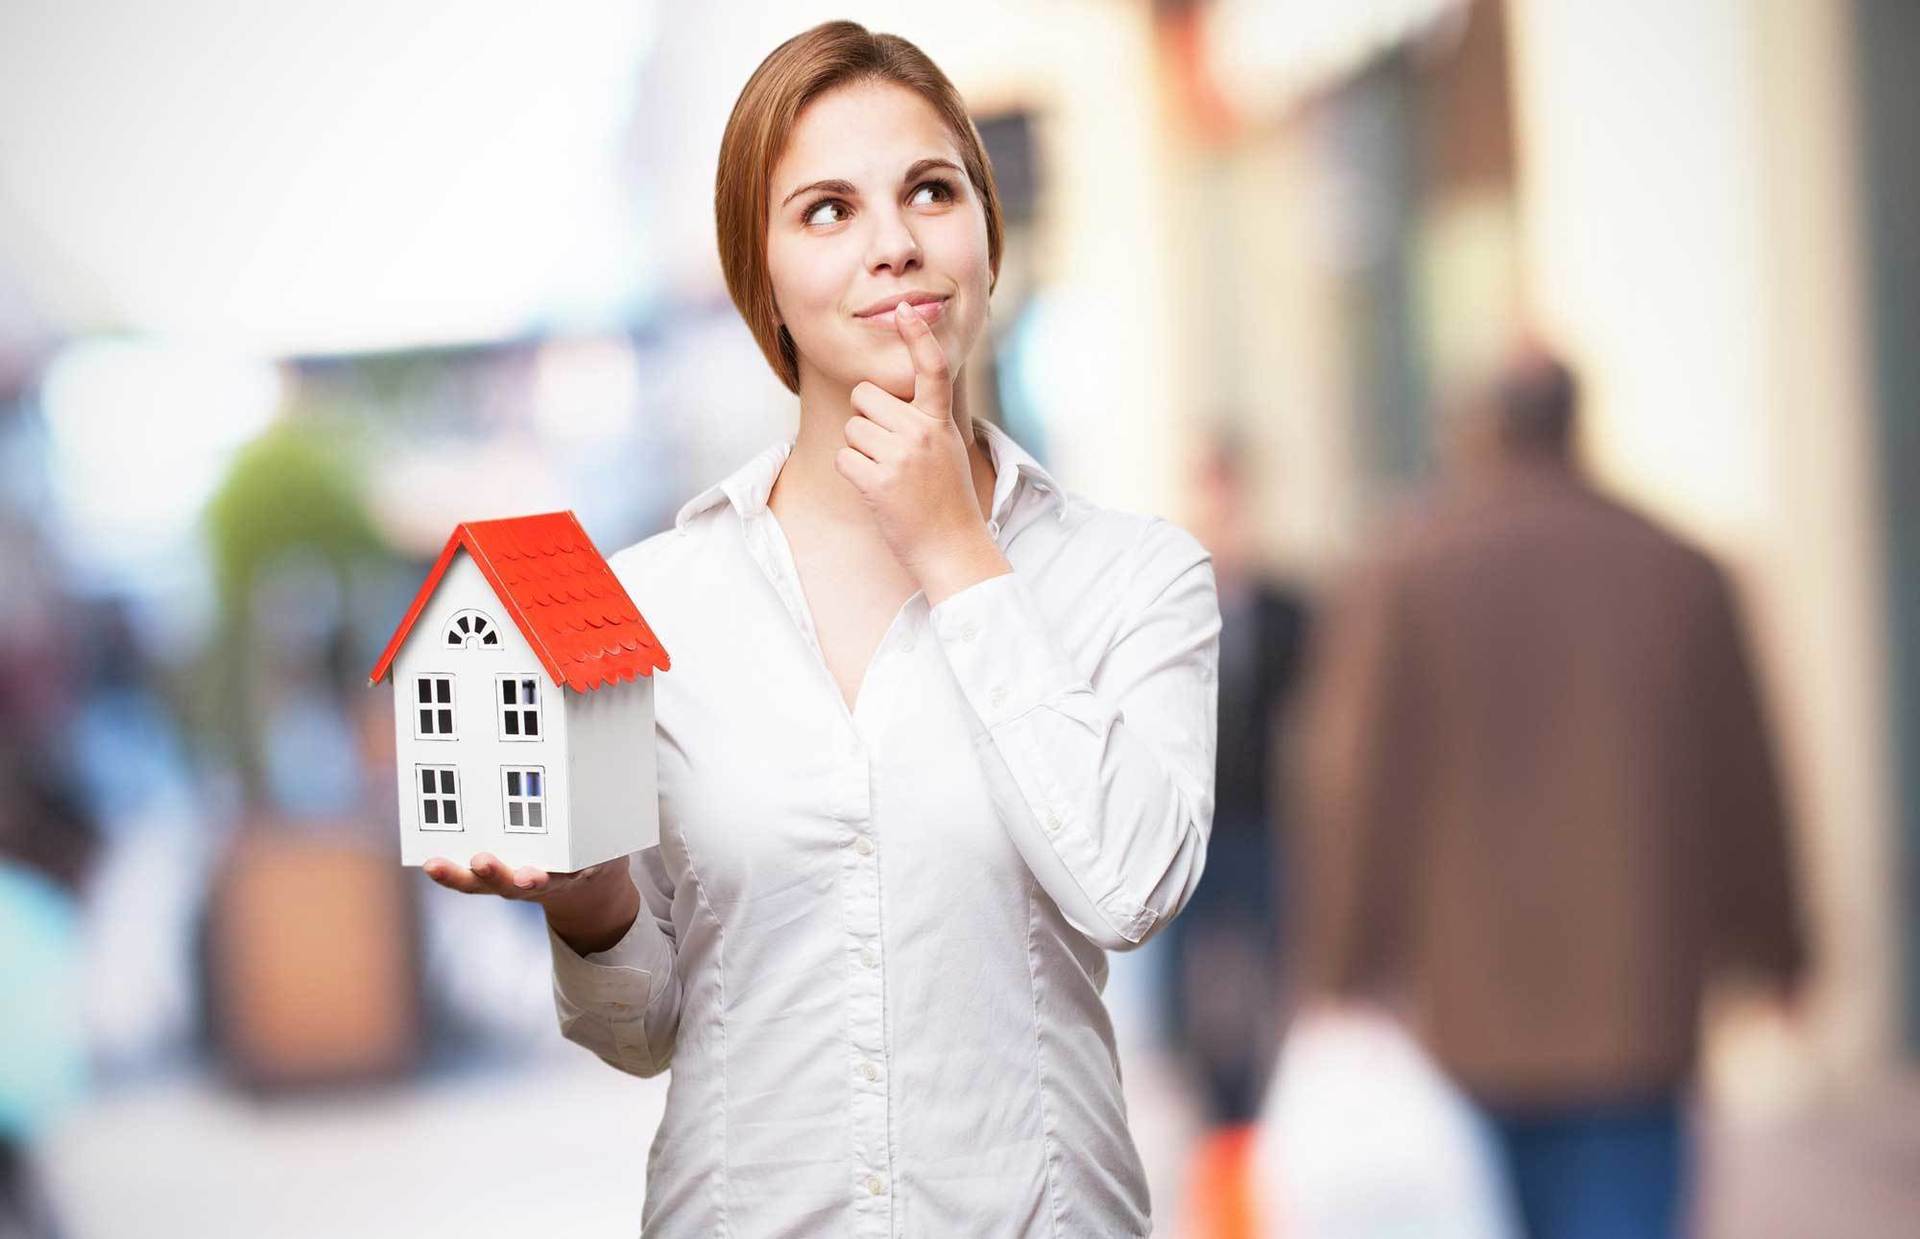 Woman thinking about buying a home